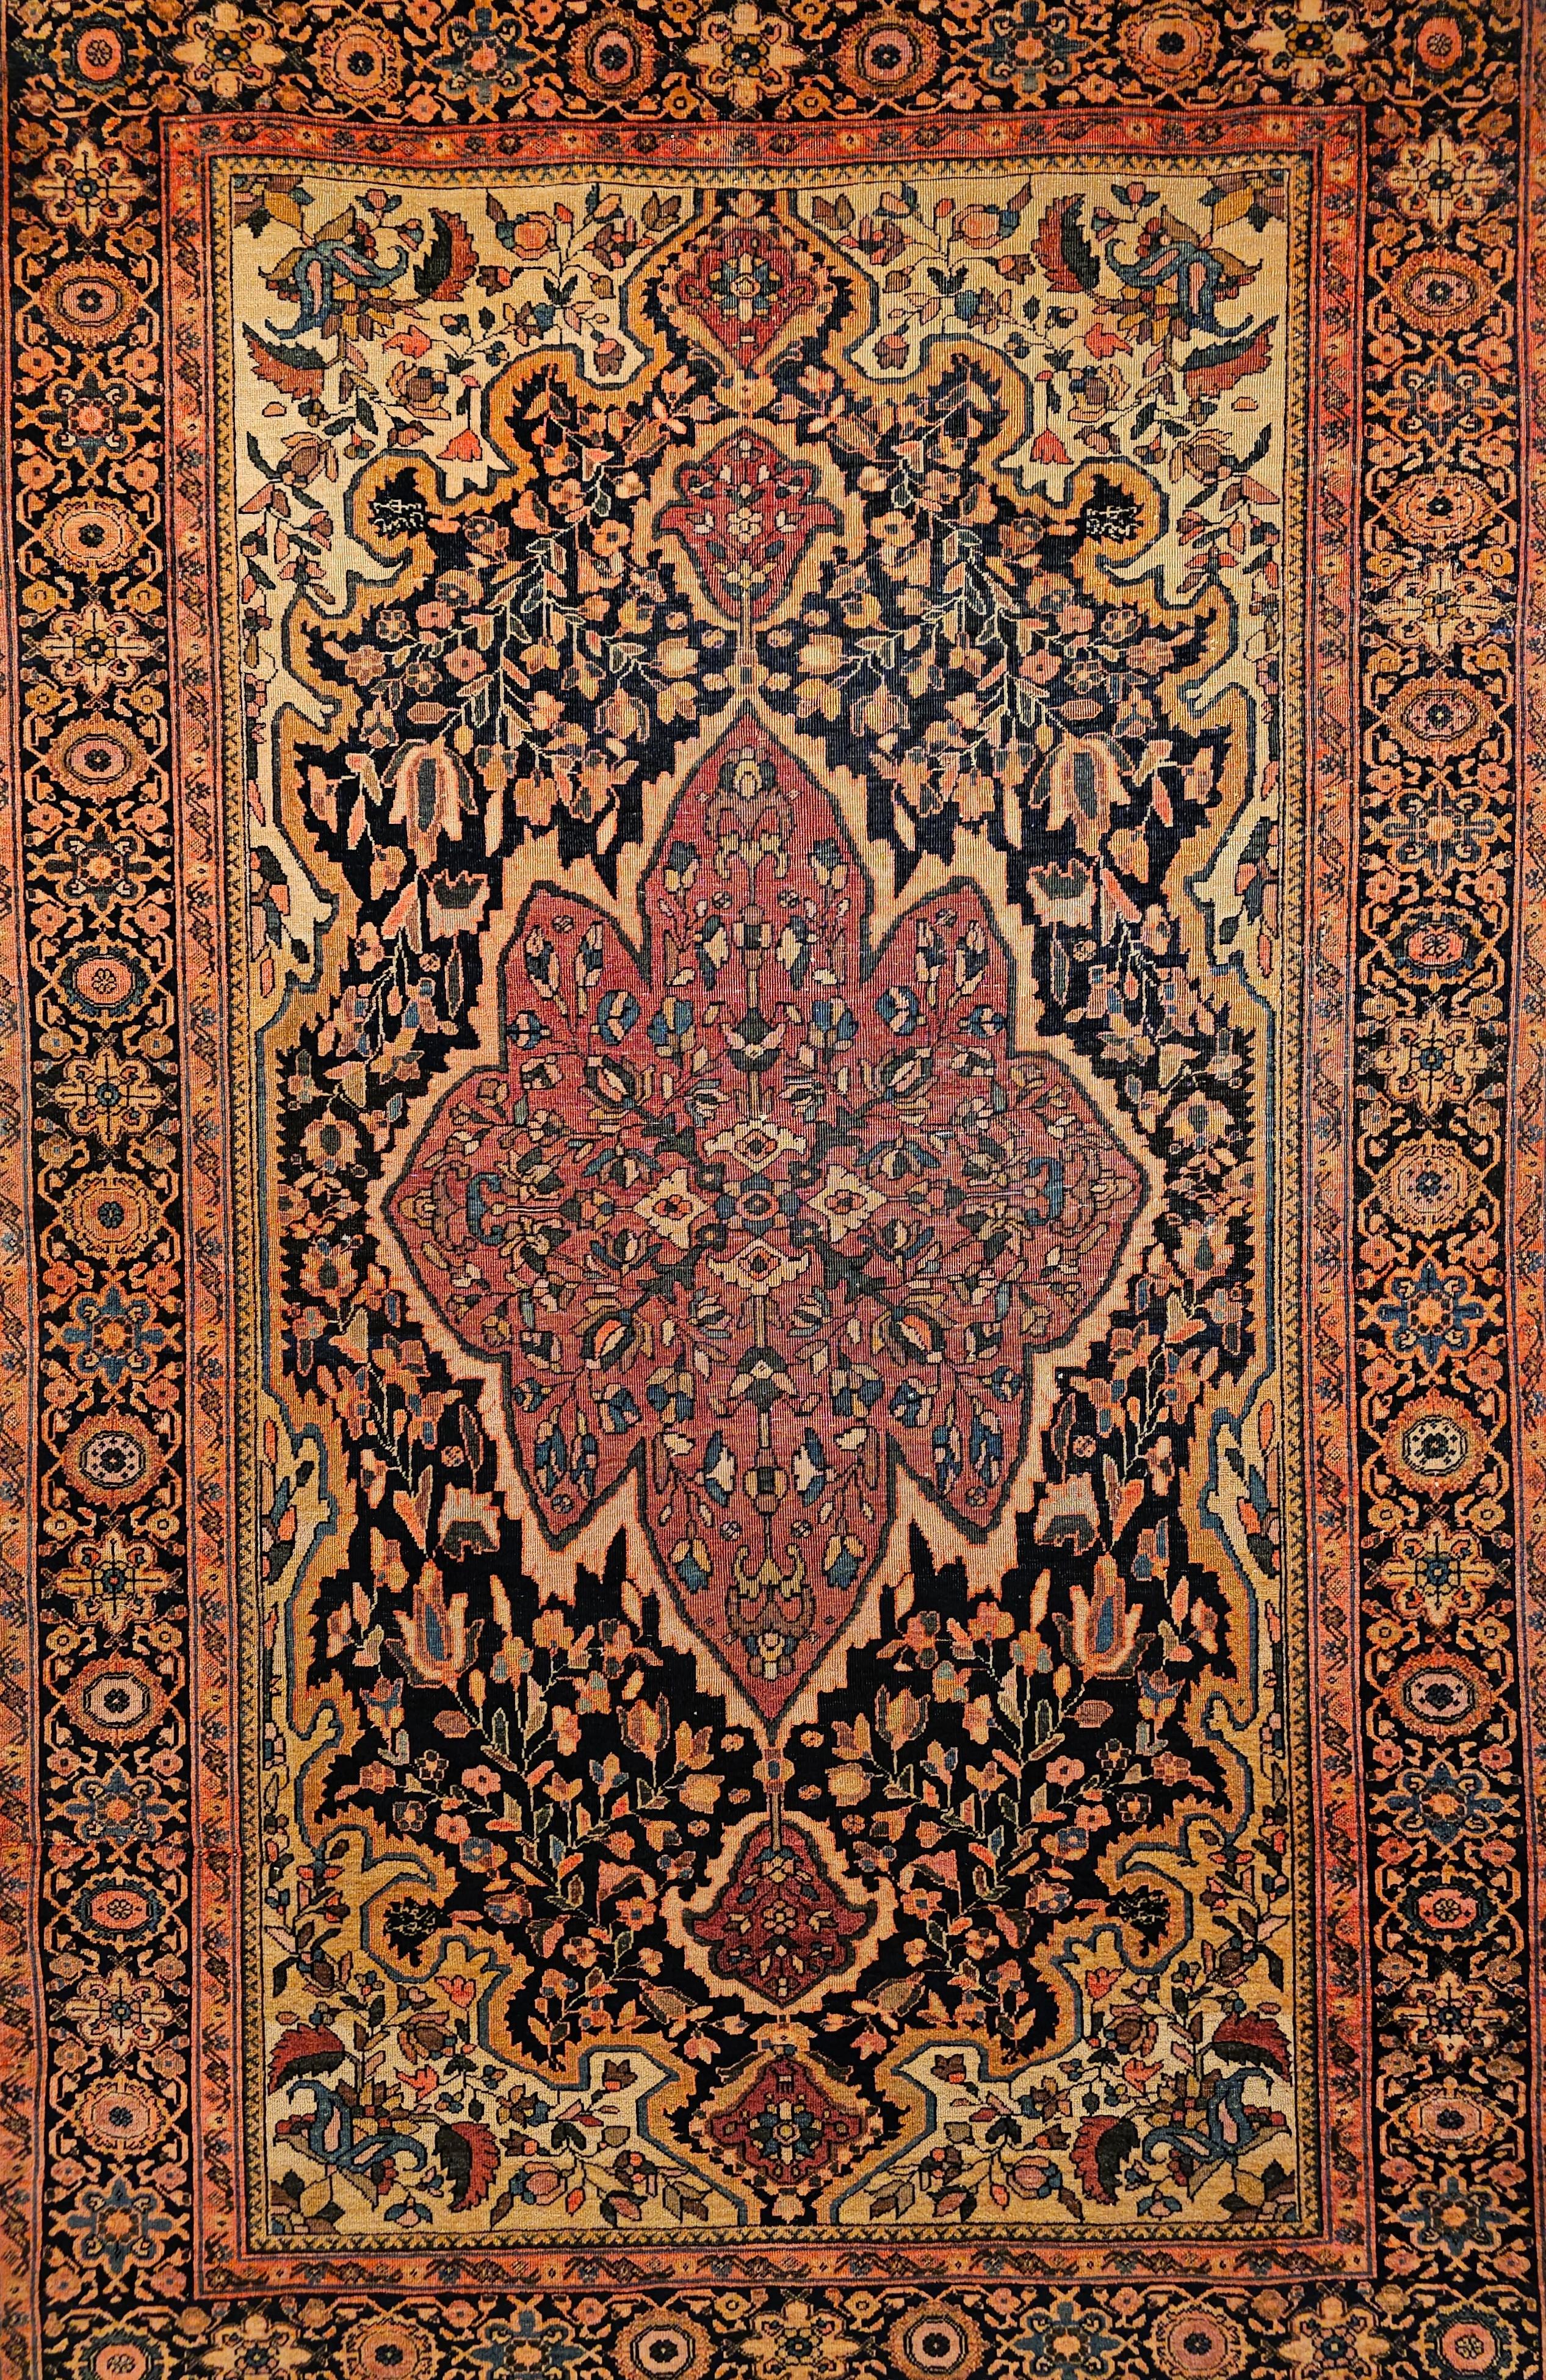 A 19th Century Persian Farahan Sarouk area rug in medallion design with floral pattern with navy blue, plum red, pale yellow, French blue colors.  The field has floral design set on a navy blue background.  There is a beautiful central medallion in